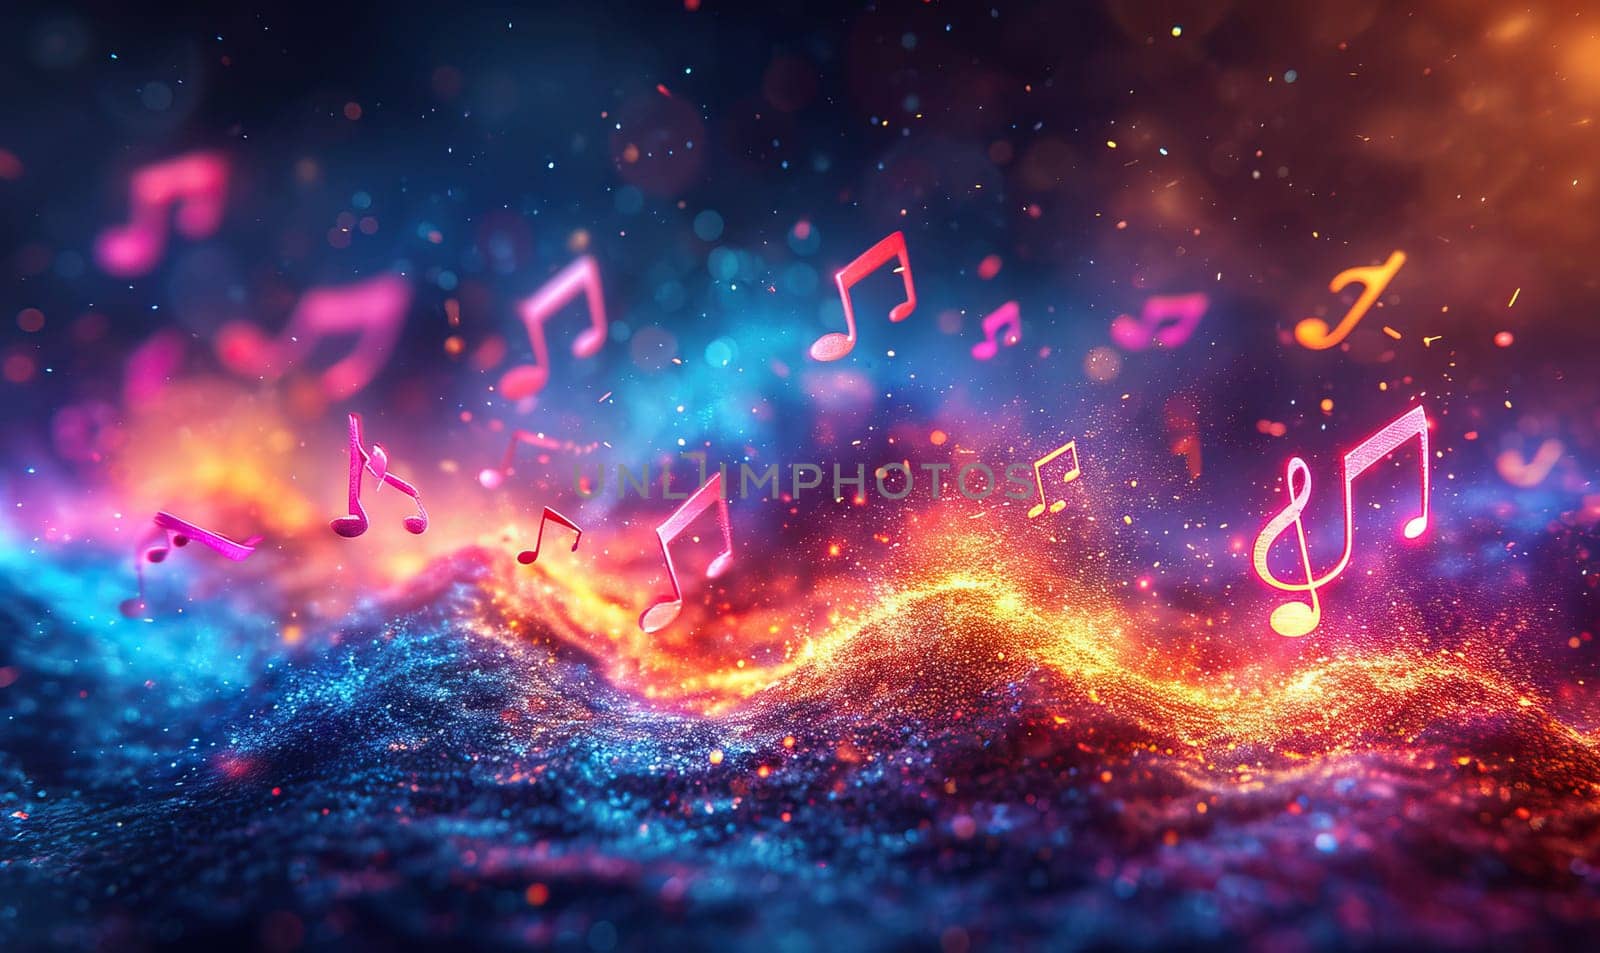 Abstract colorful musical background with notes, instruments. by Fischeron